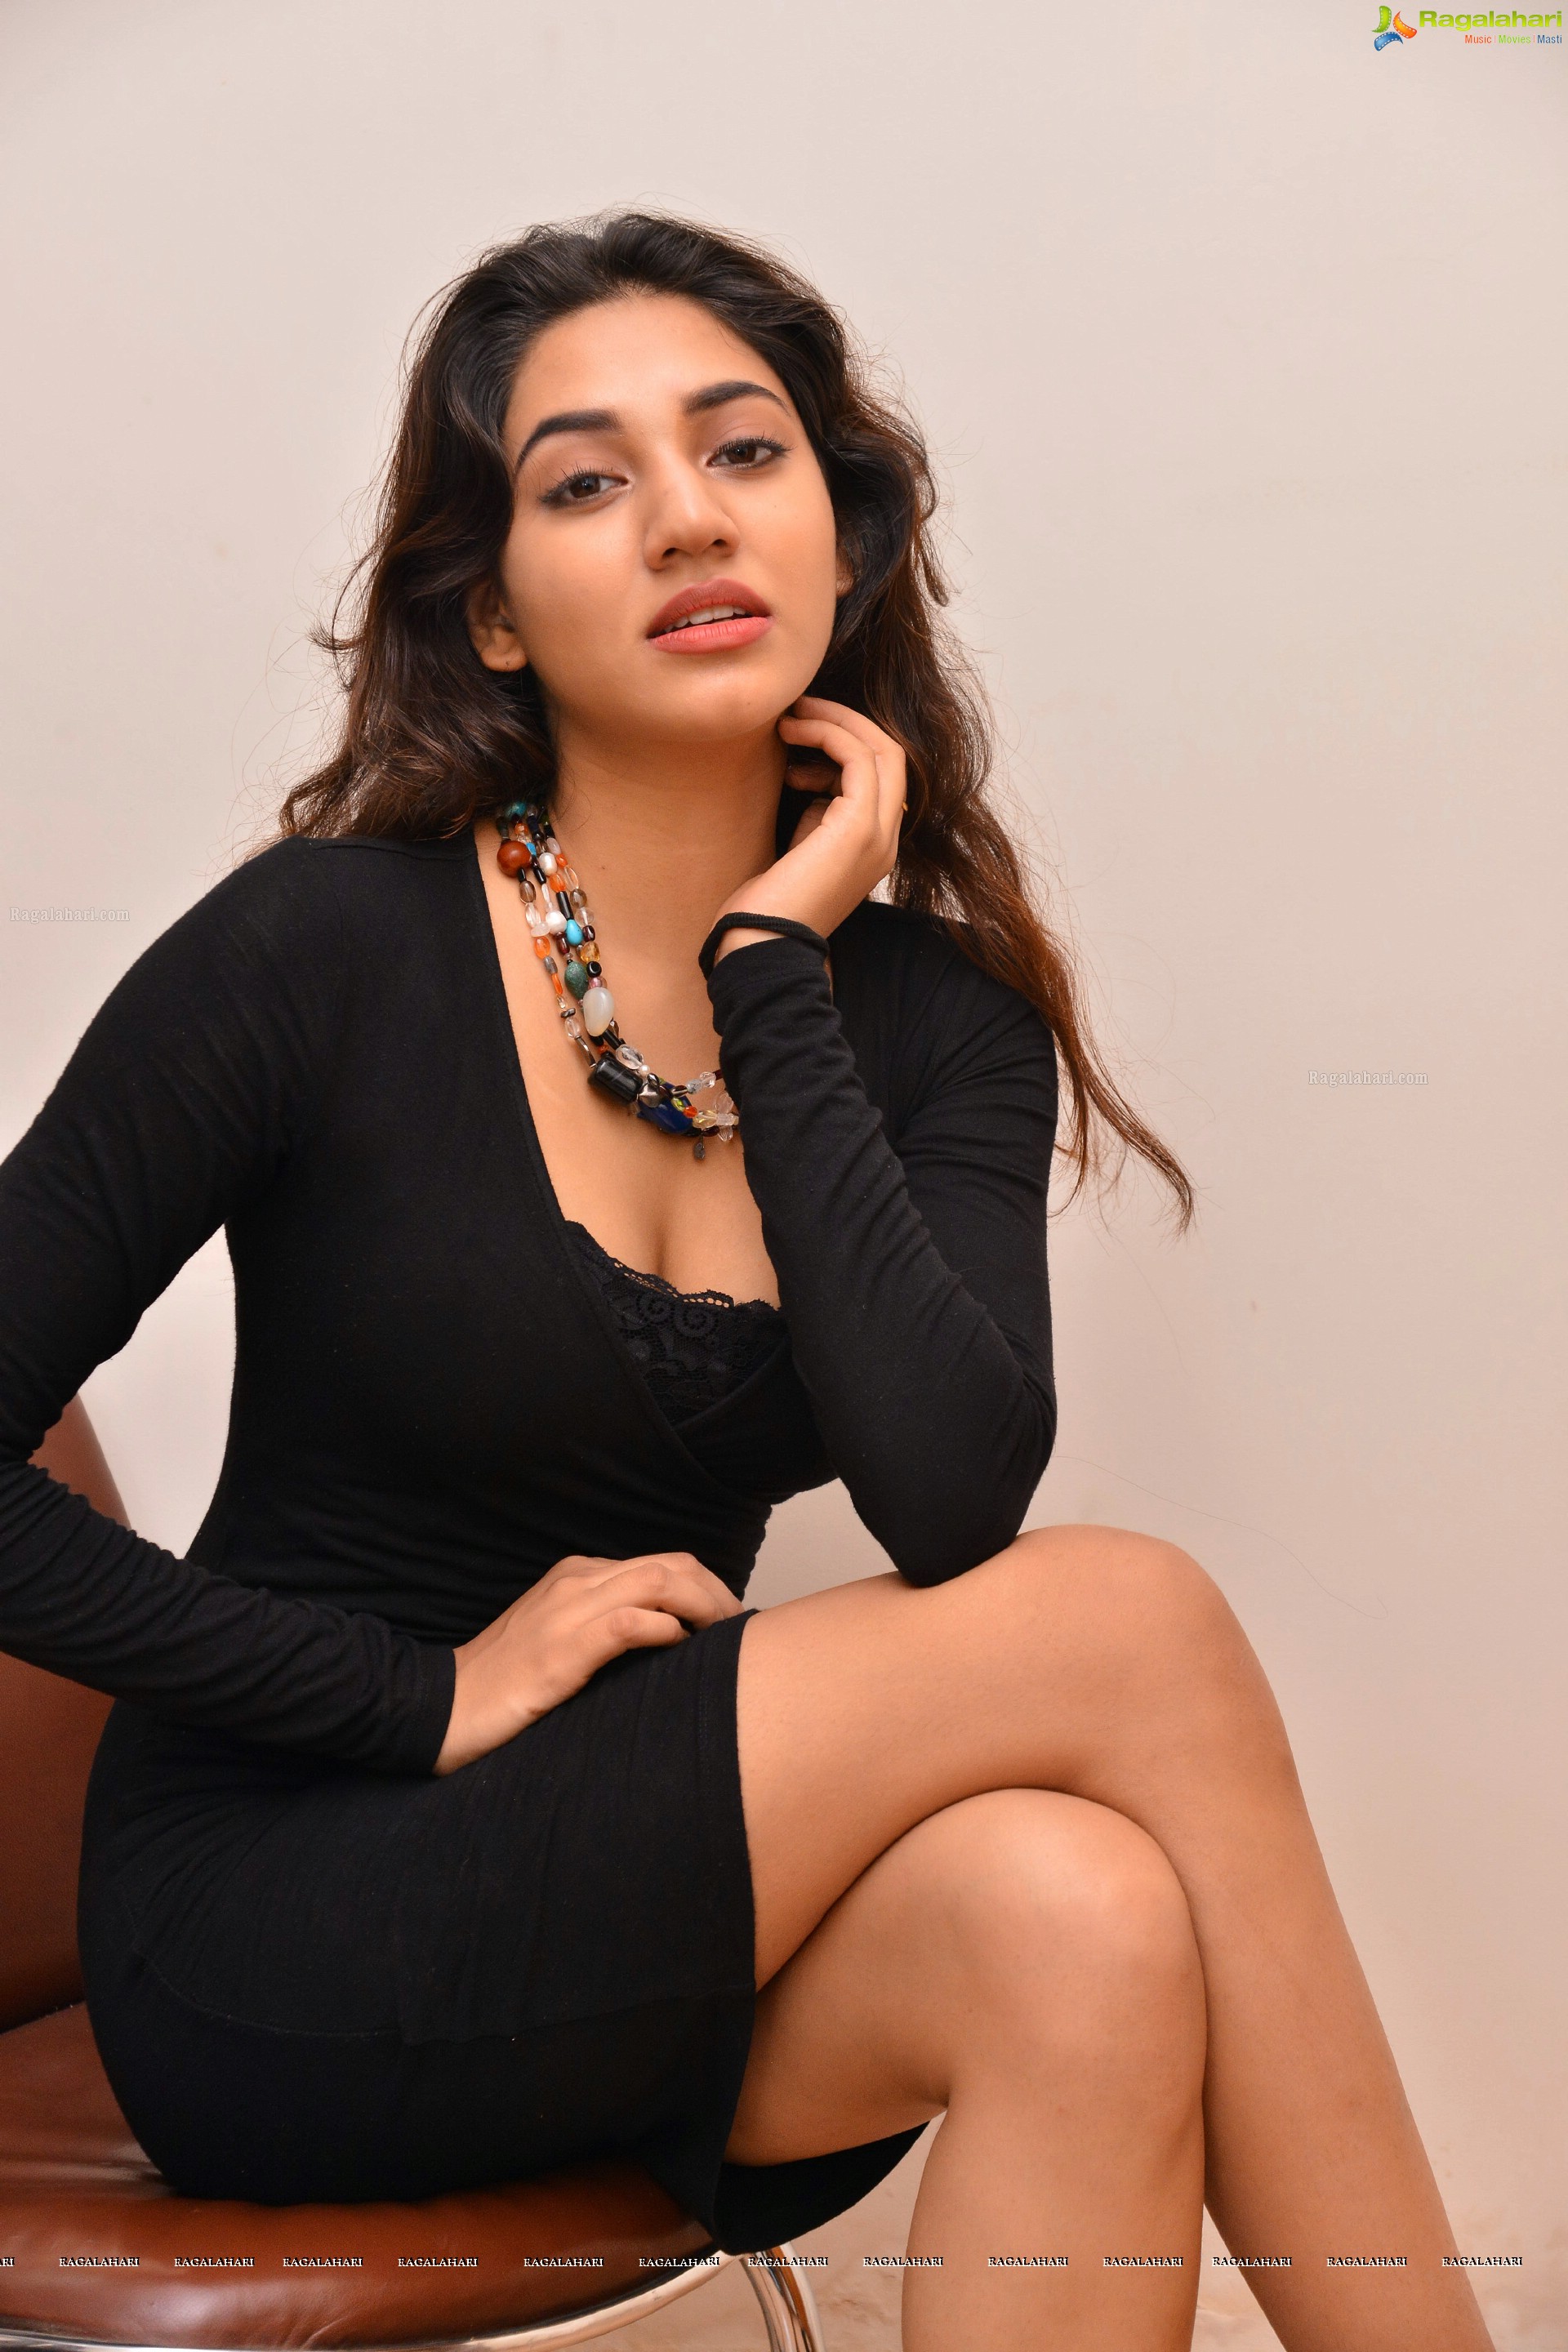 Sonakshi Singh Rawat at Naa Love Story Interview (High Definition)